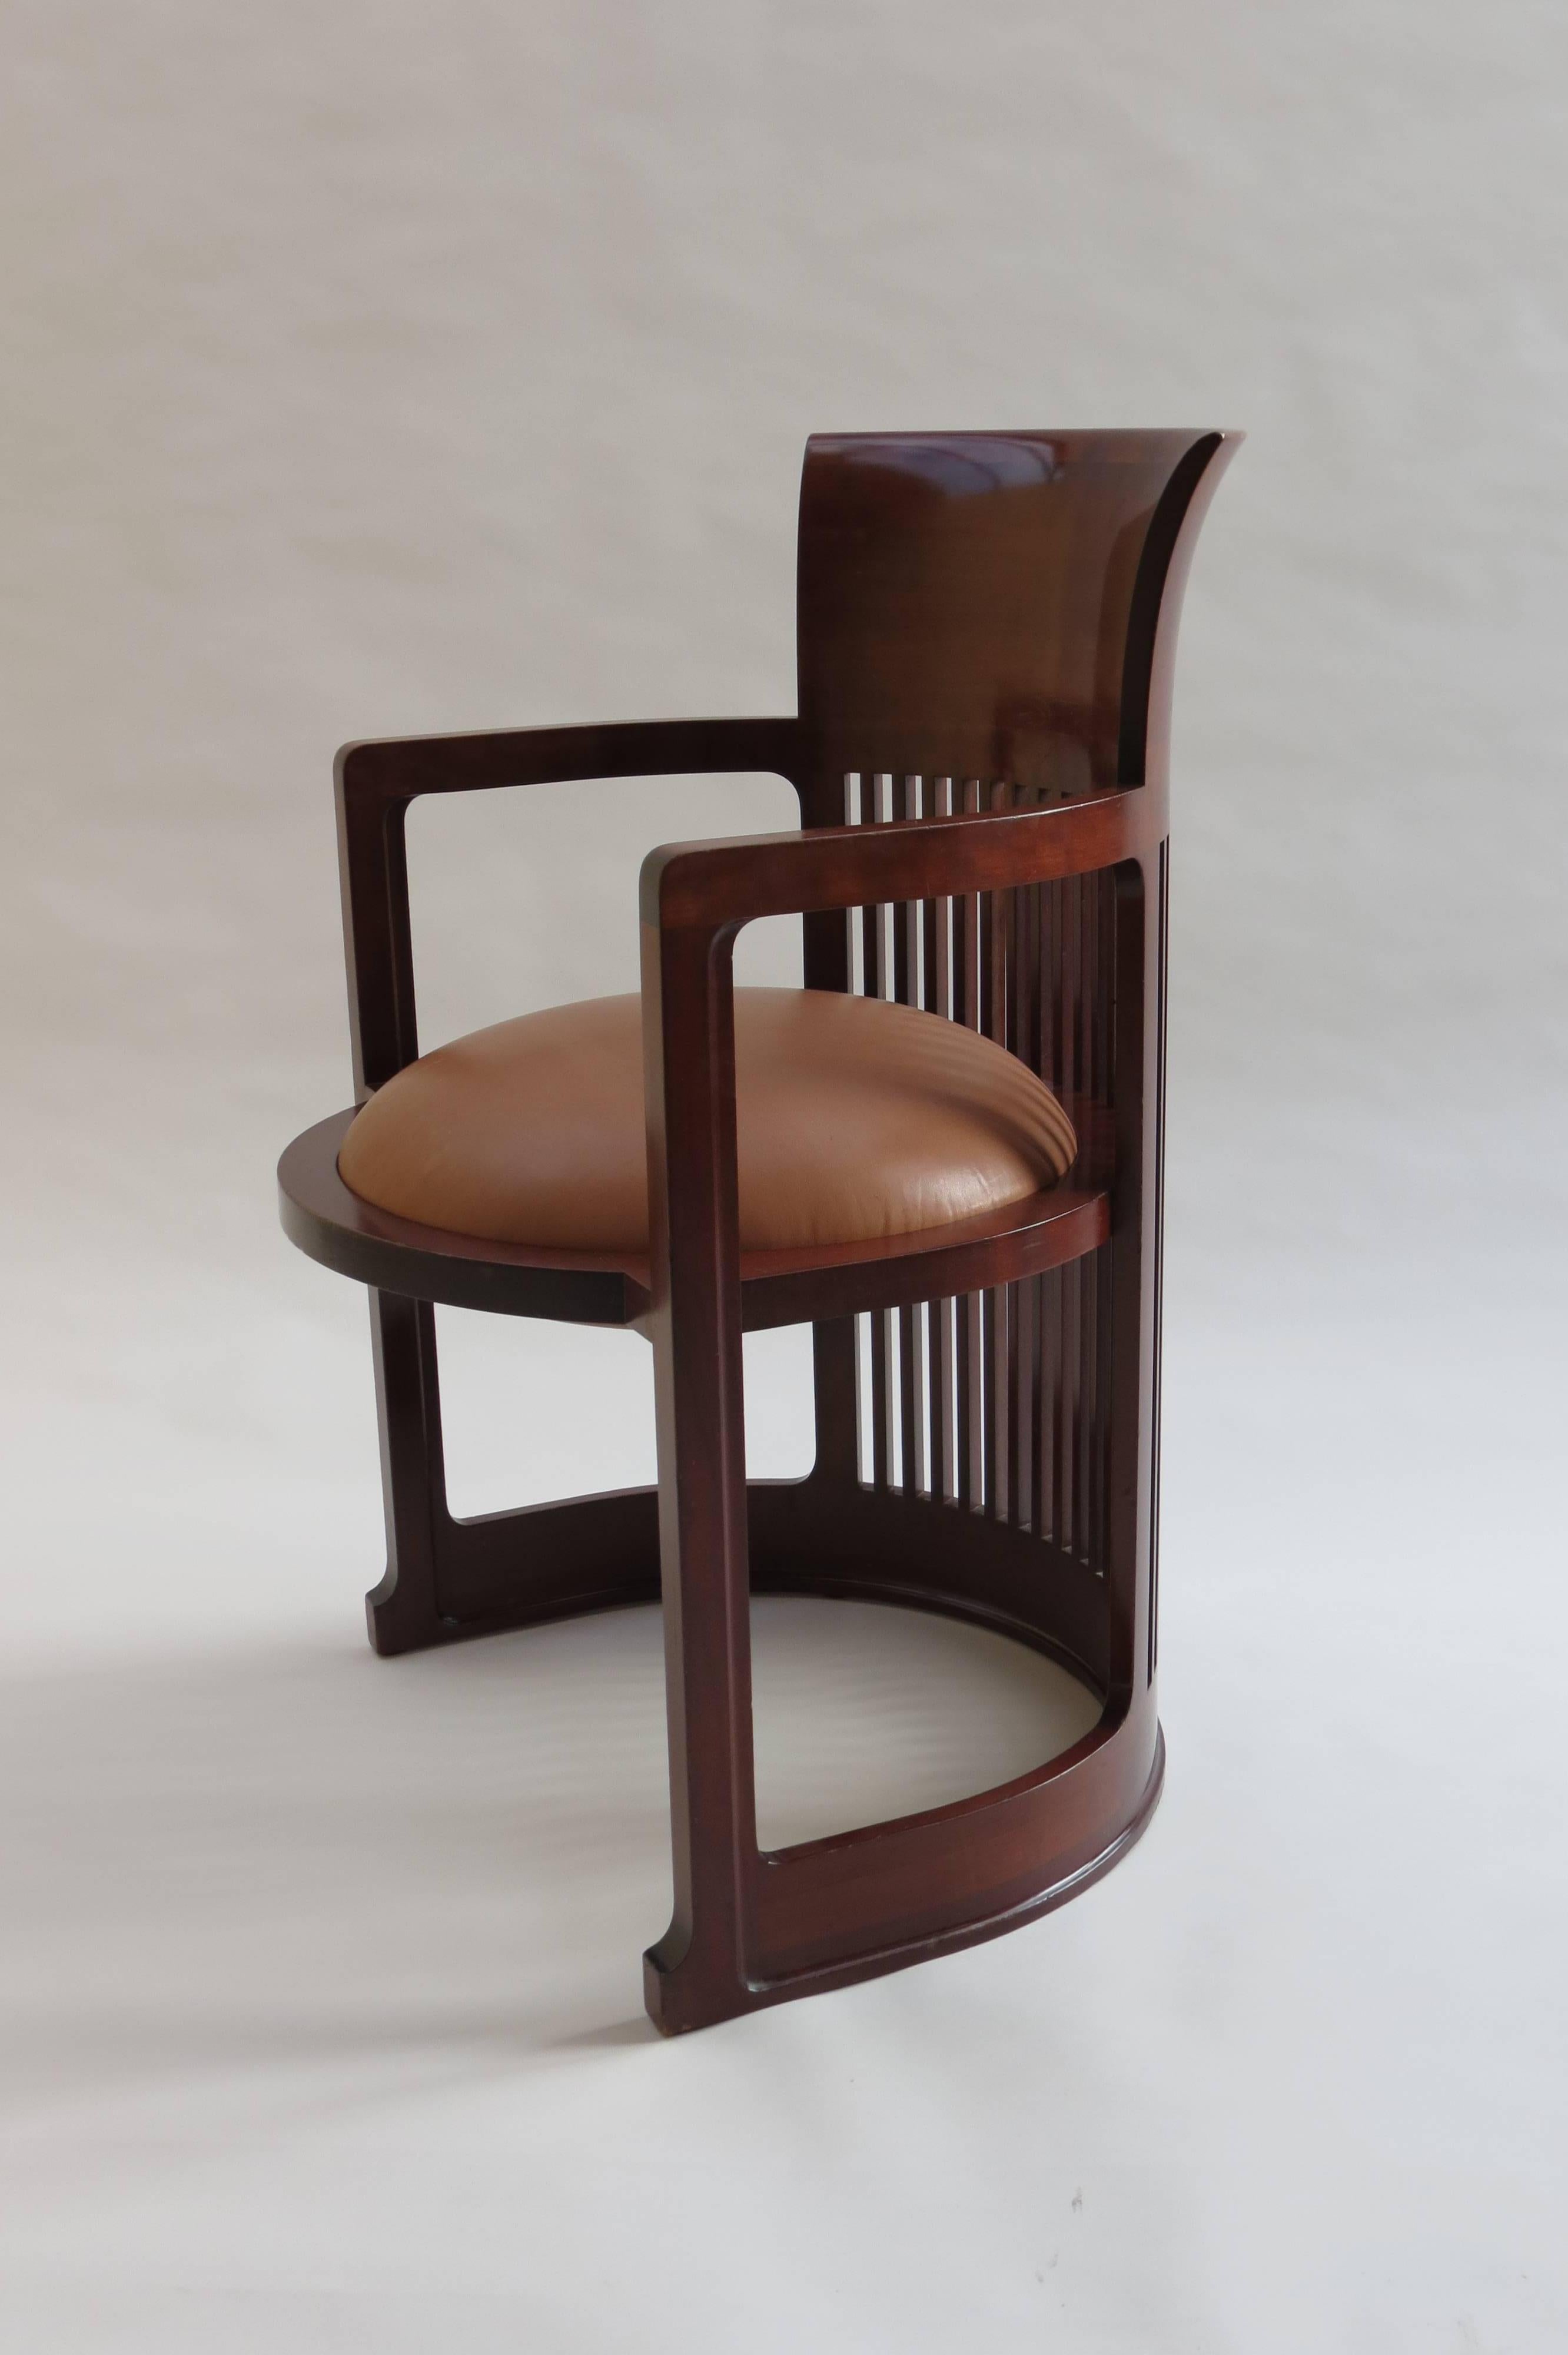 Taliesin Barrel chair is designed by Frank Lloyd Wright and produced by Cassina.
Made from solid cherrywood, newly covered ball cushion in  leather.

Stamped to underside Frank Lloyd Wright Cassina 4167 1986.
  